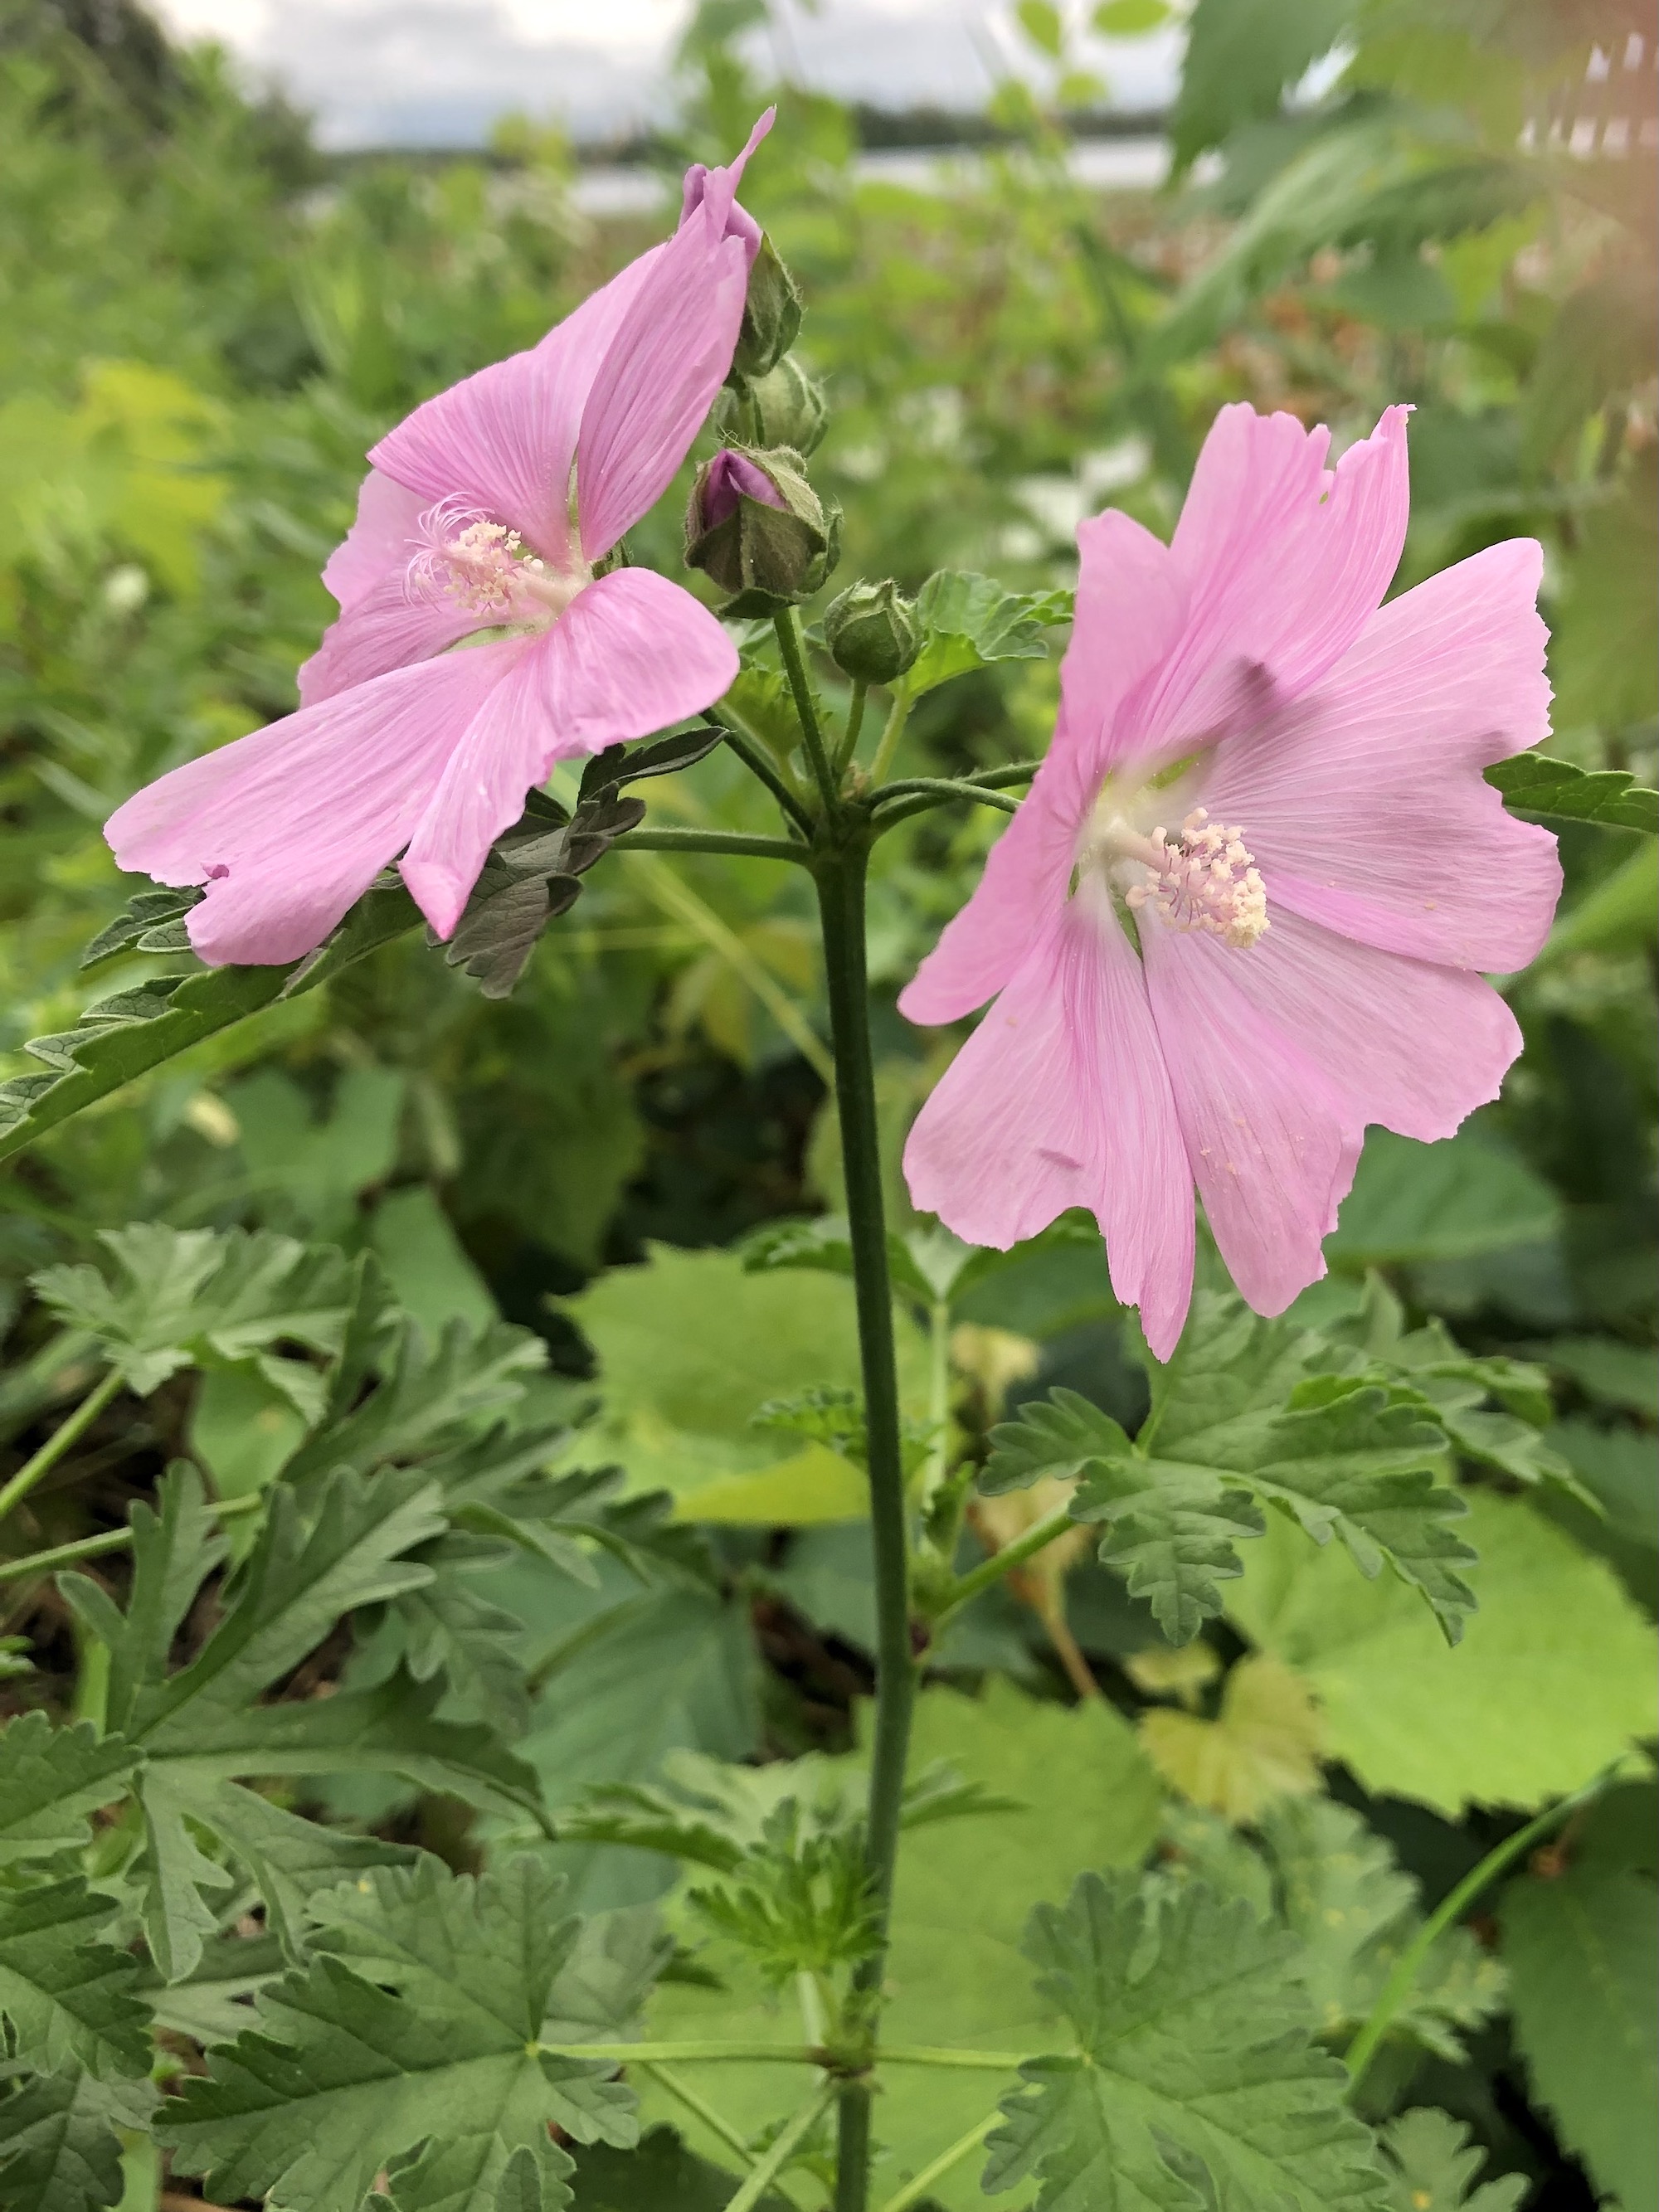 Vervain Mallow on the shore of Lake Wingra in Vilas Park in Madison, Wisconsin on September 4, 2021.